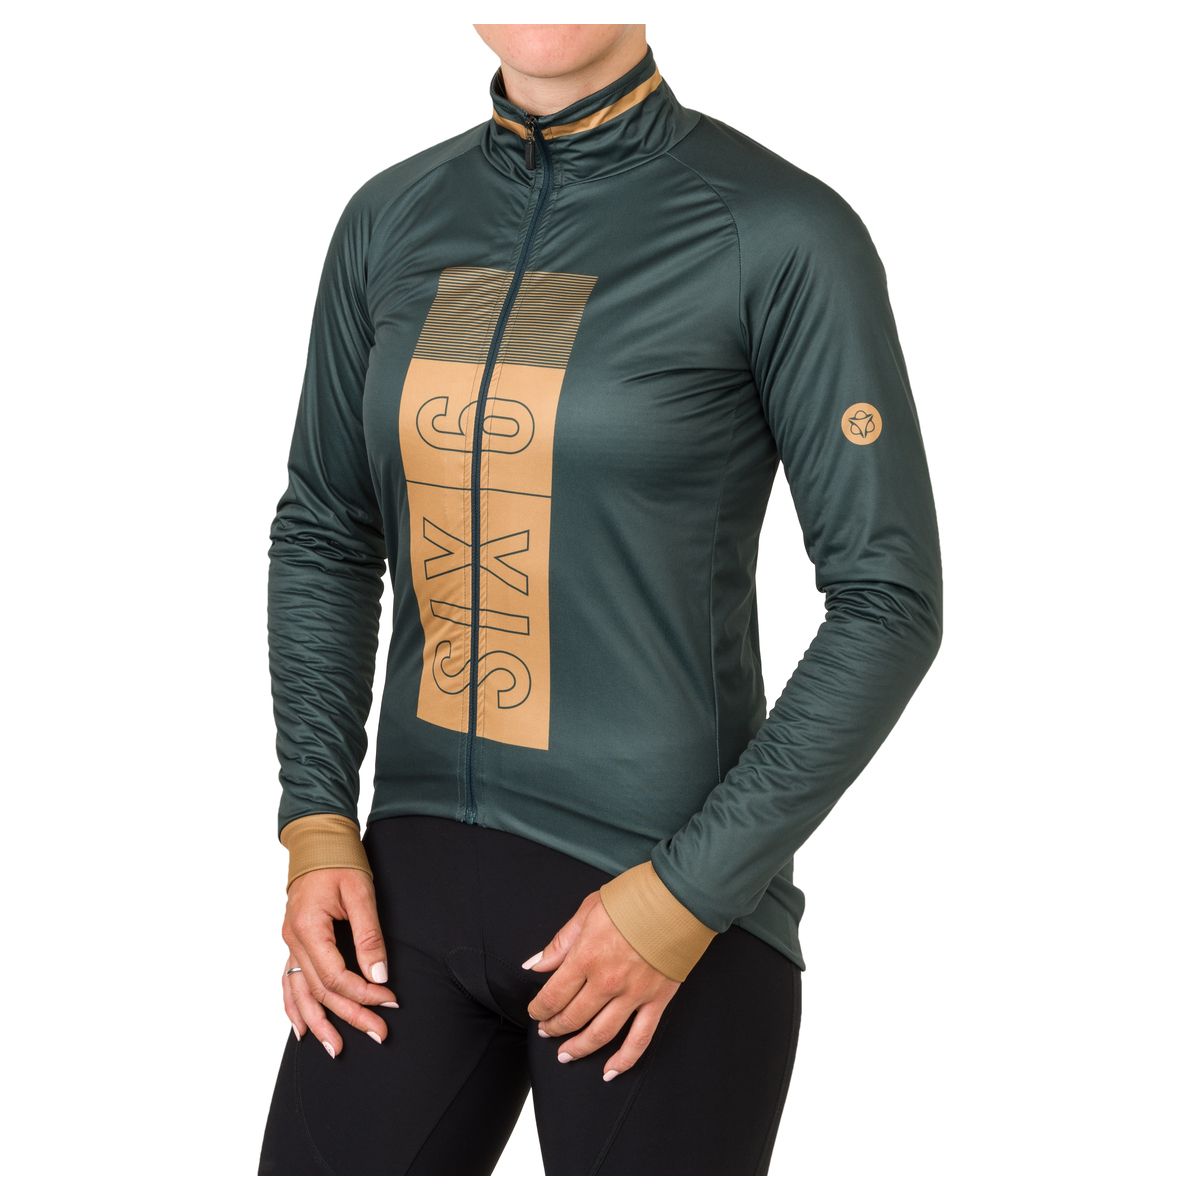 Polartec Alpha Giacca termica II SIX6 Donne fit example